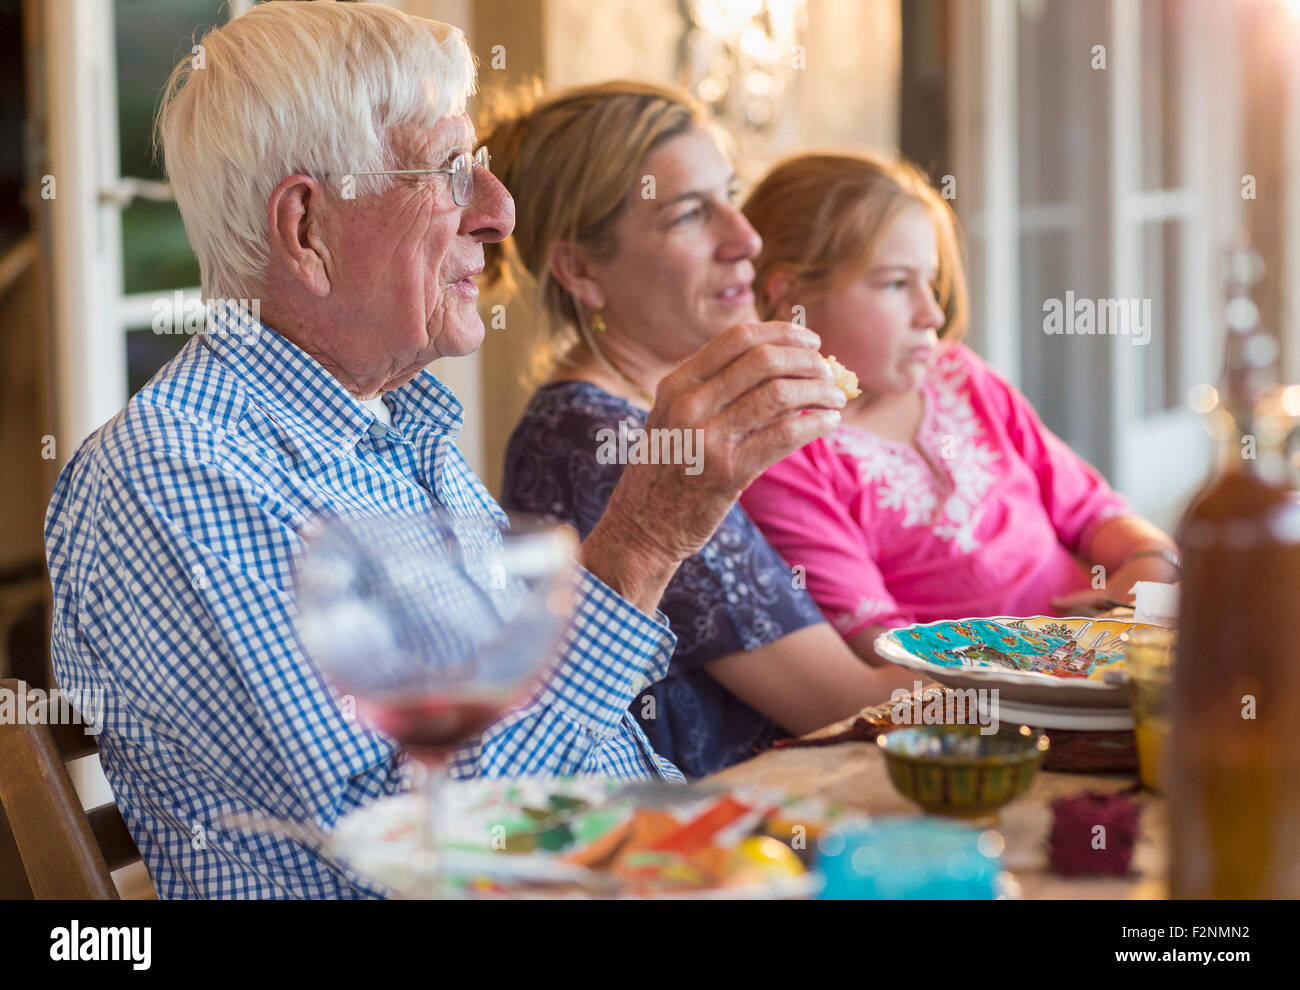 Caucasian family eating at table outdoors Stock Photo